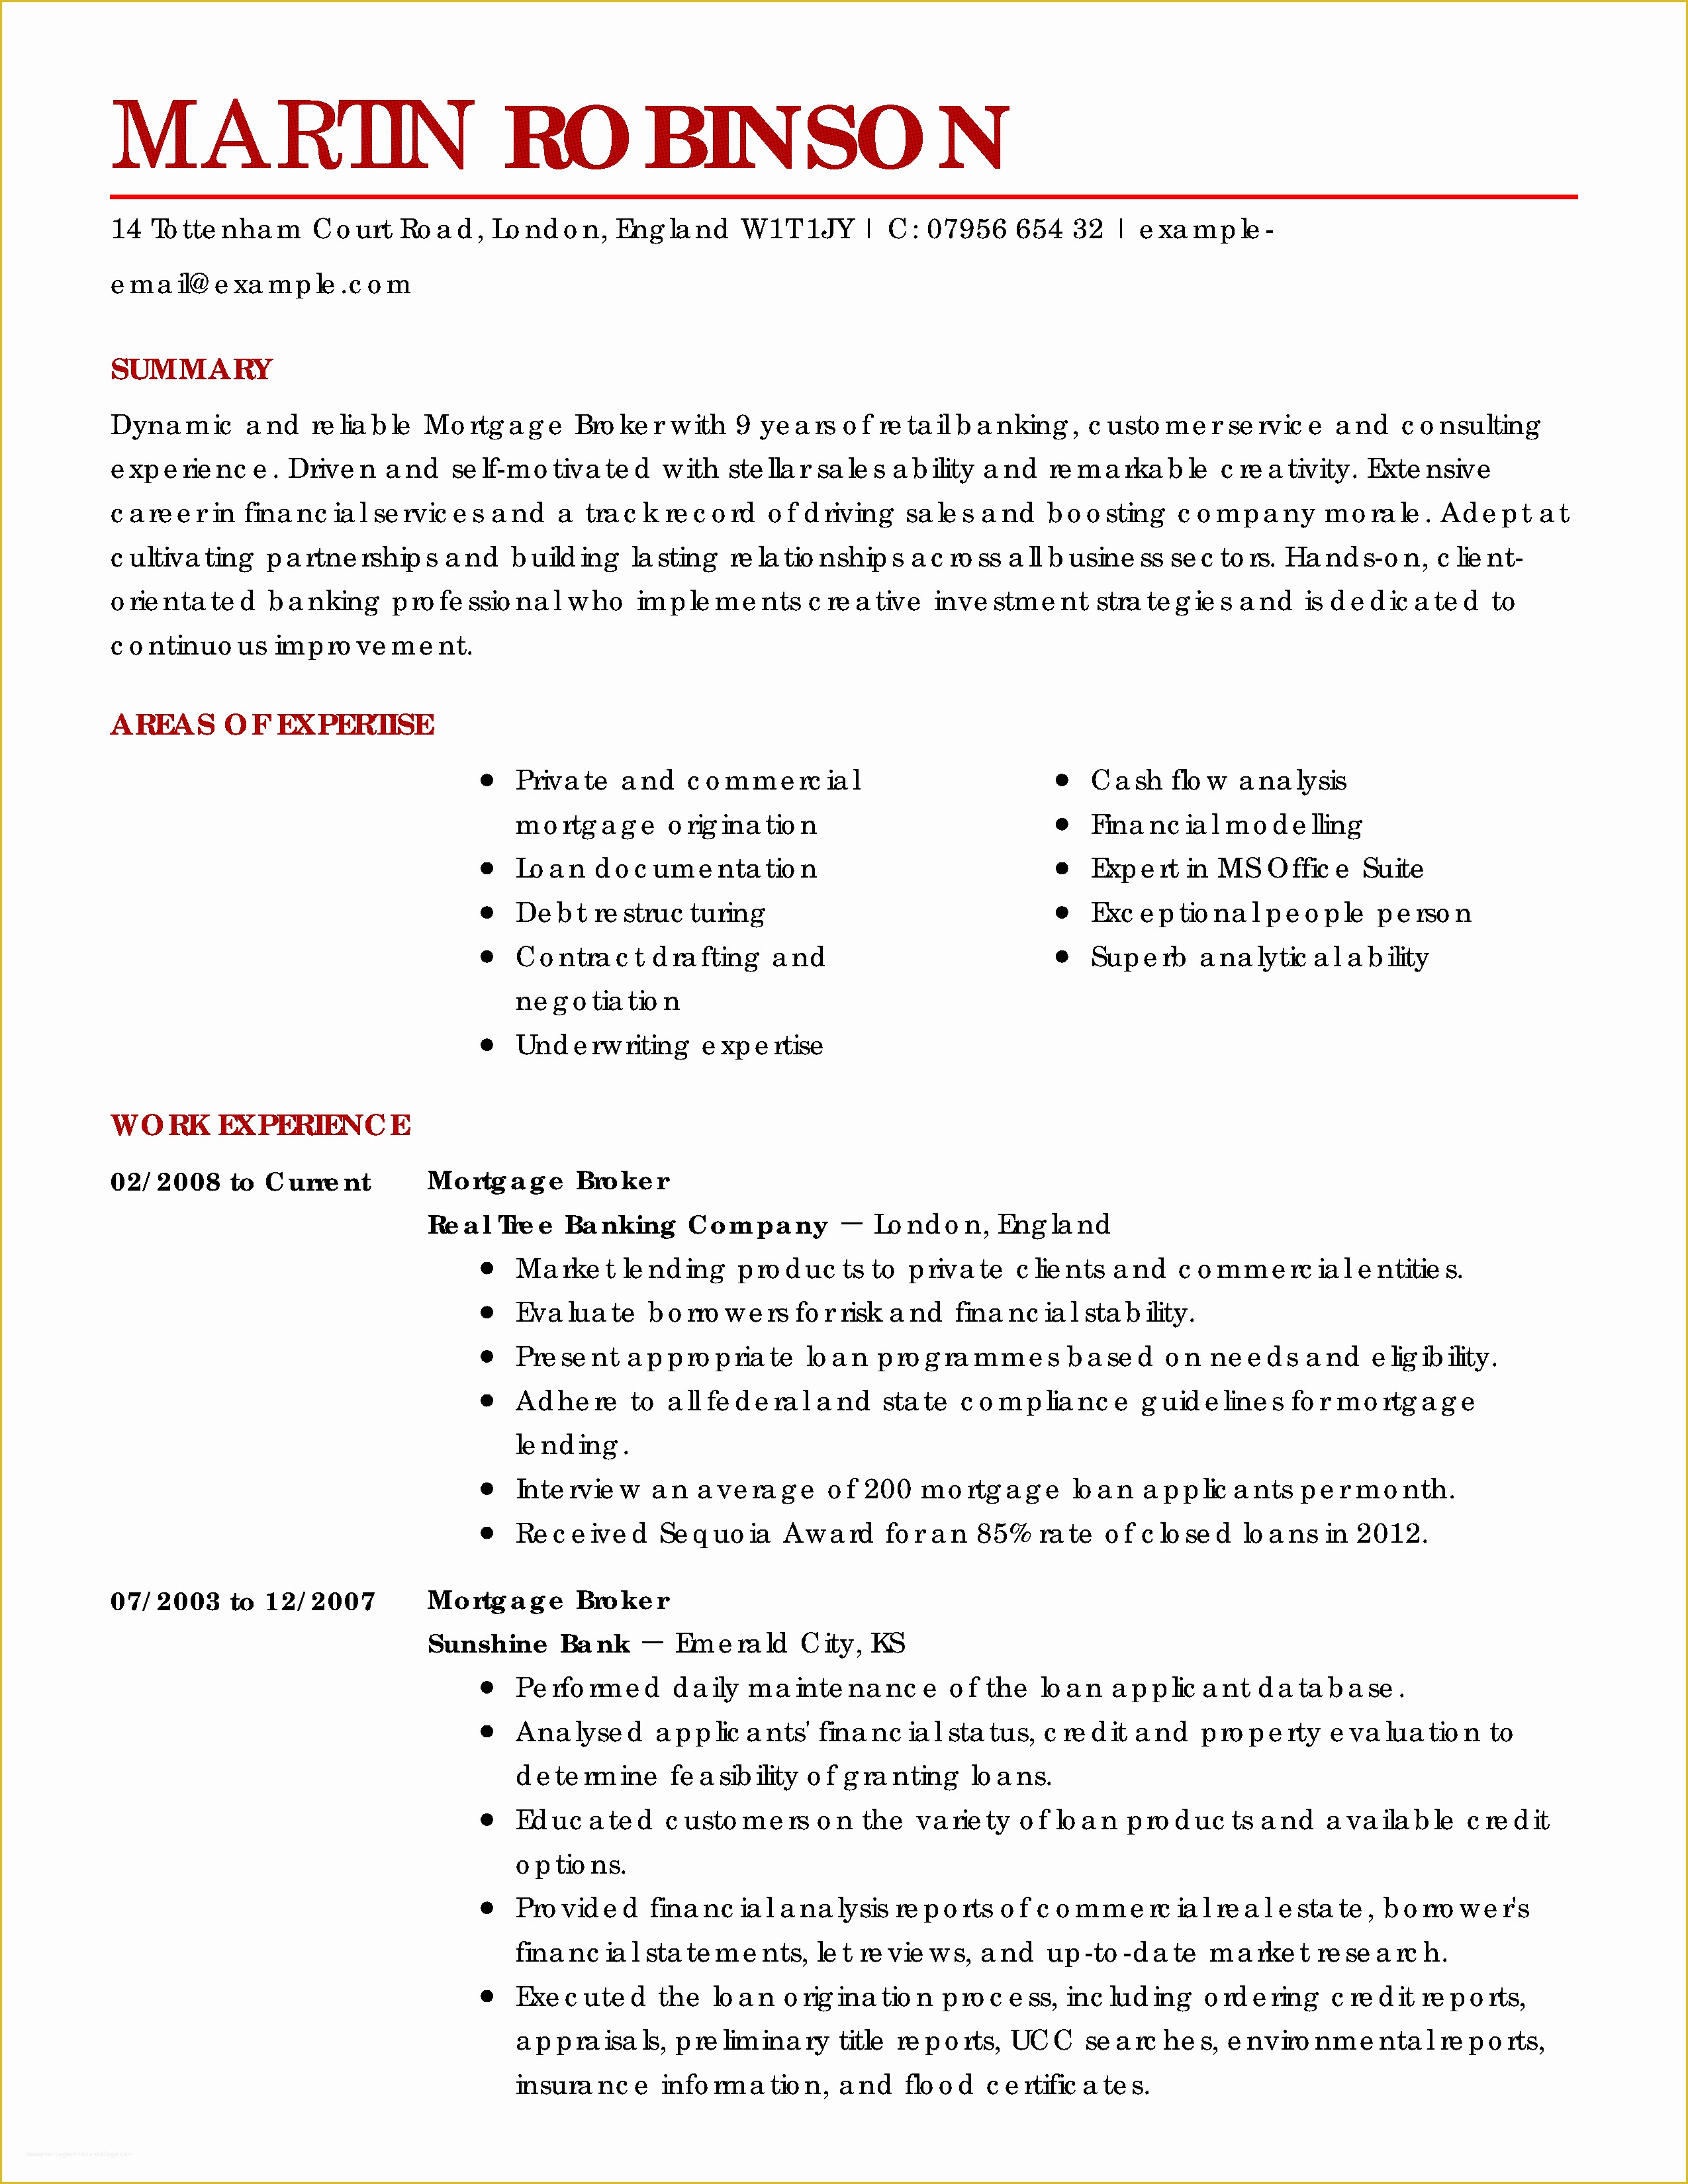 Actual Free Resume Templates Of Amazing Real Estate Resume Examples to Get You Hired